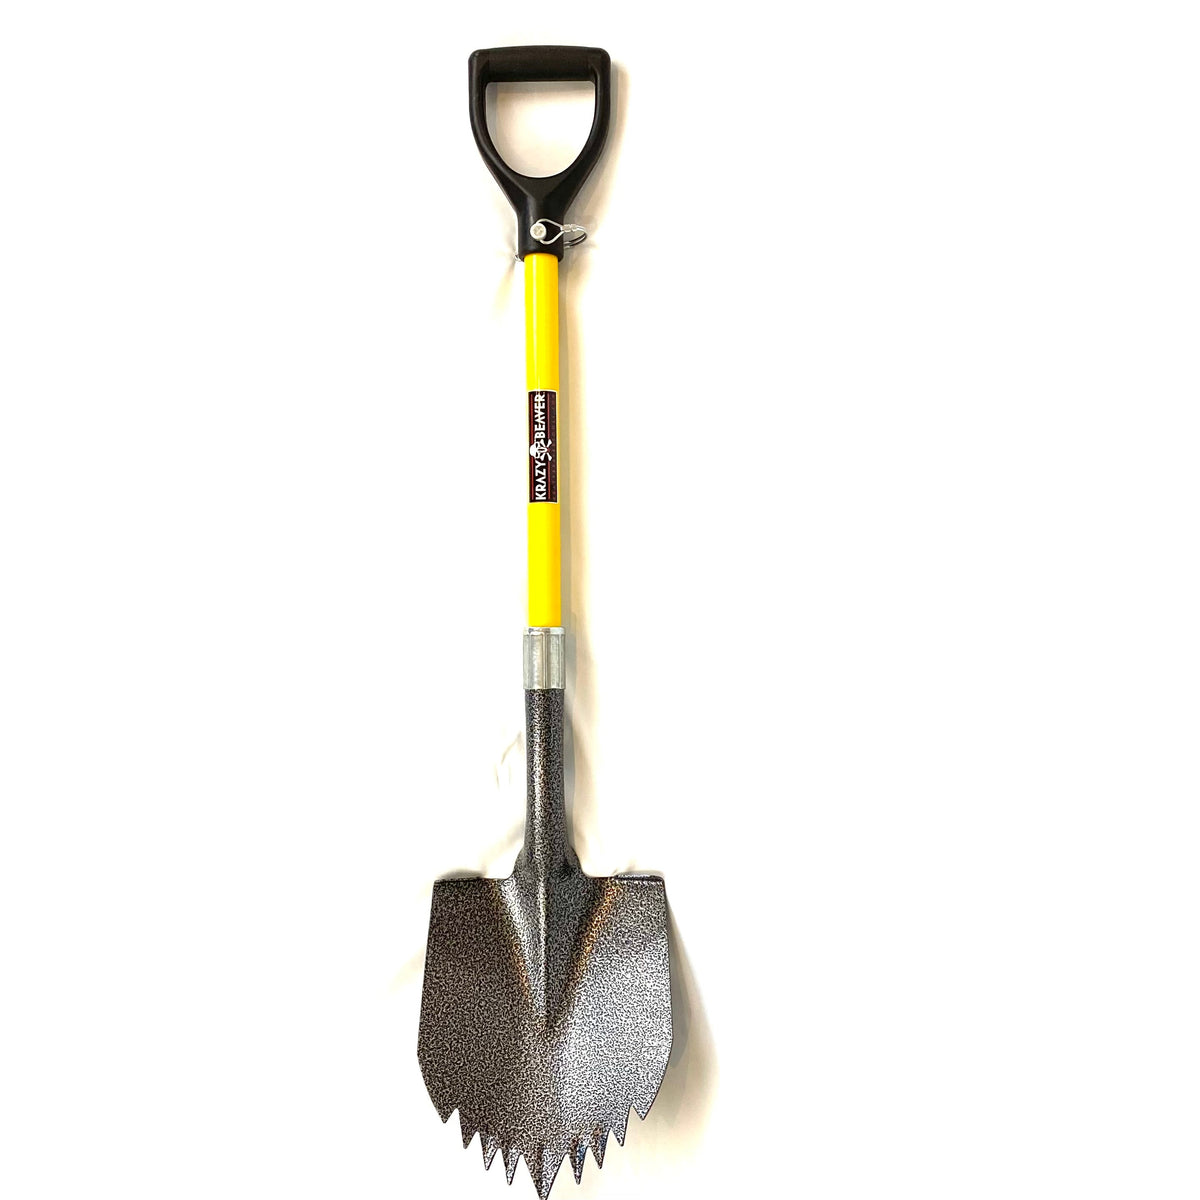 Krazy Beaver Shovel (Silver Vein / Yellow Handle 45639)  Recovery Gear, Camping gear, Shovel, Camping Krazy Beaver Tools- Overland Kitted